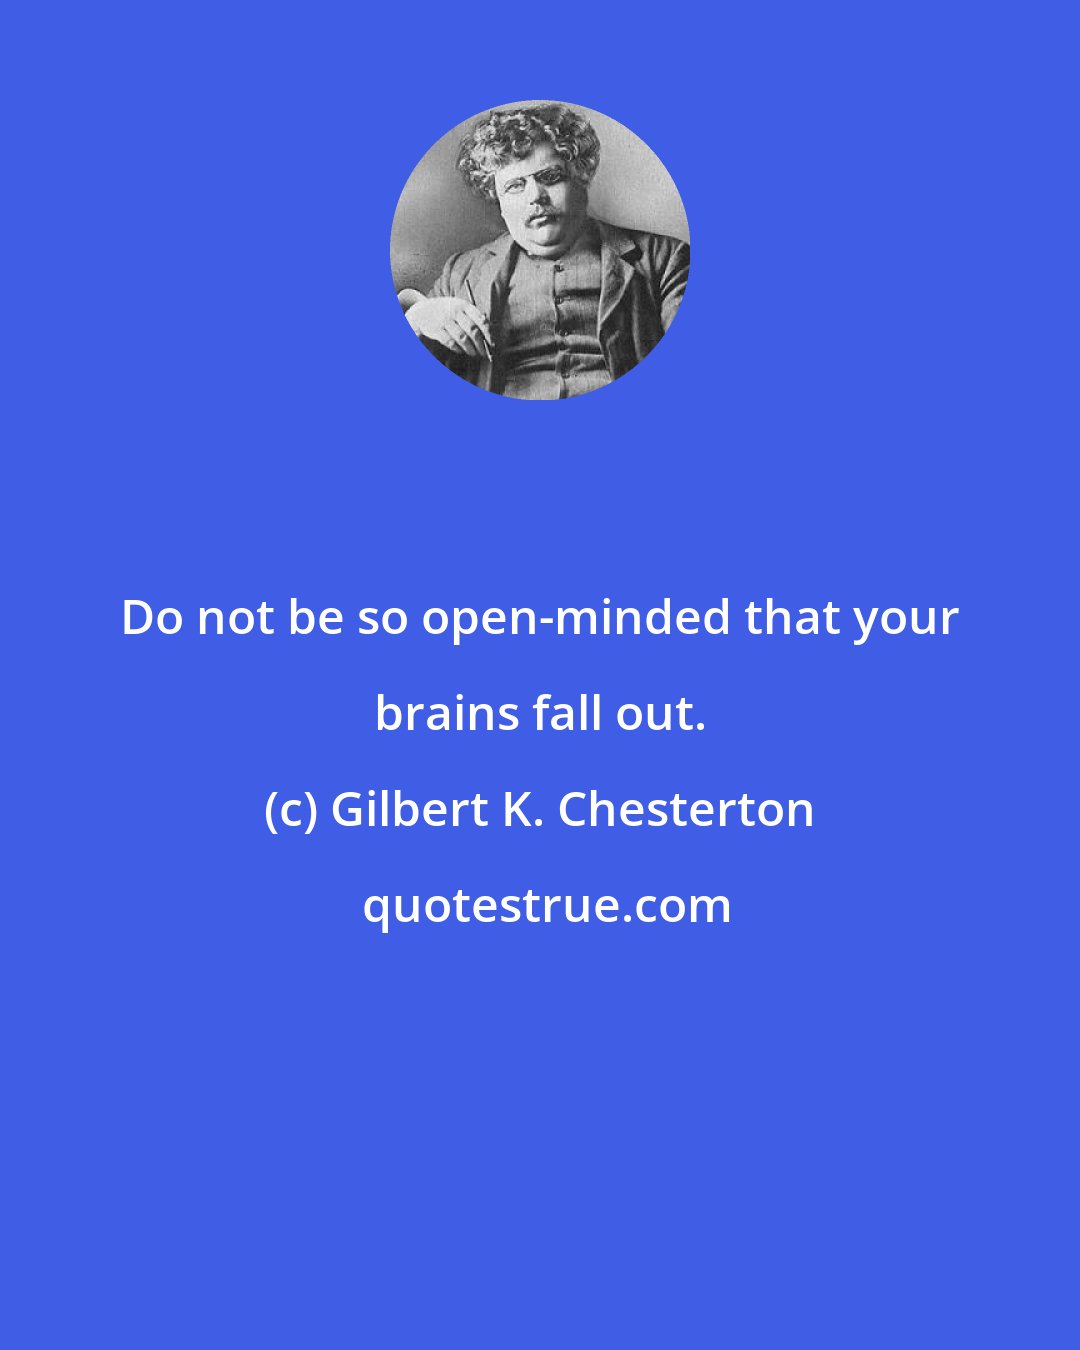 Gilbert K. Chesterton: Do not be so open-minded that your brains fall out.